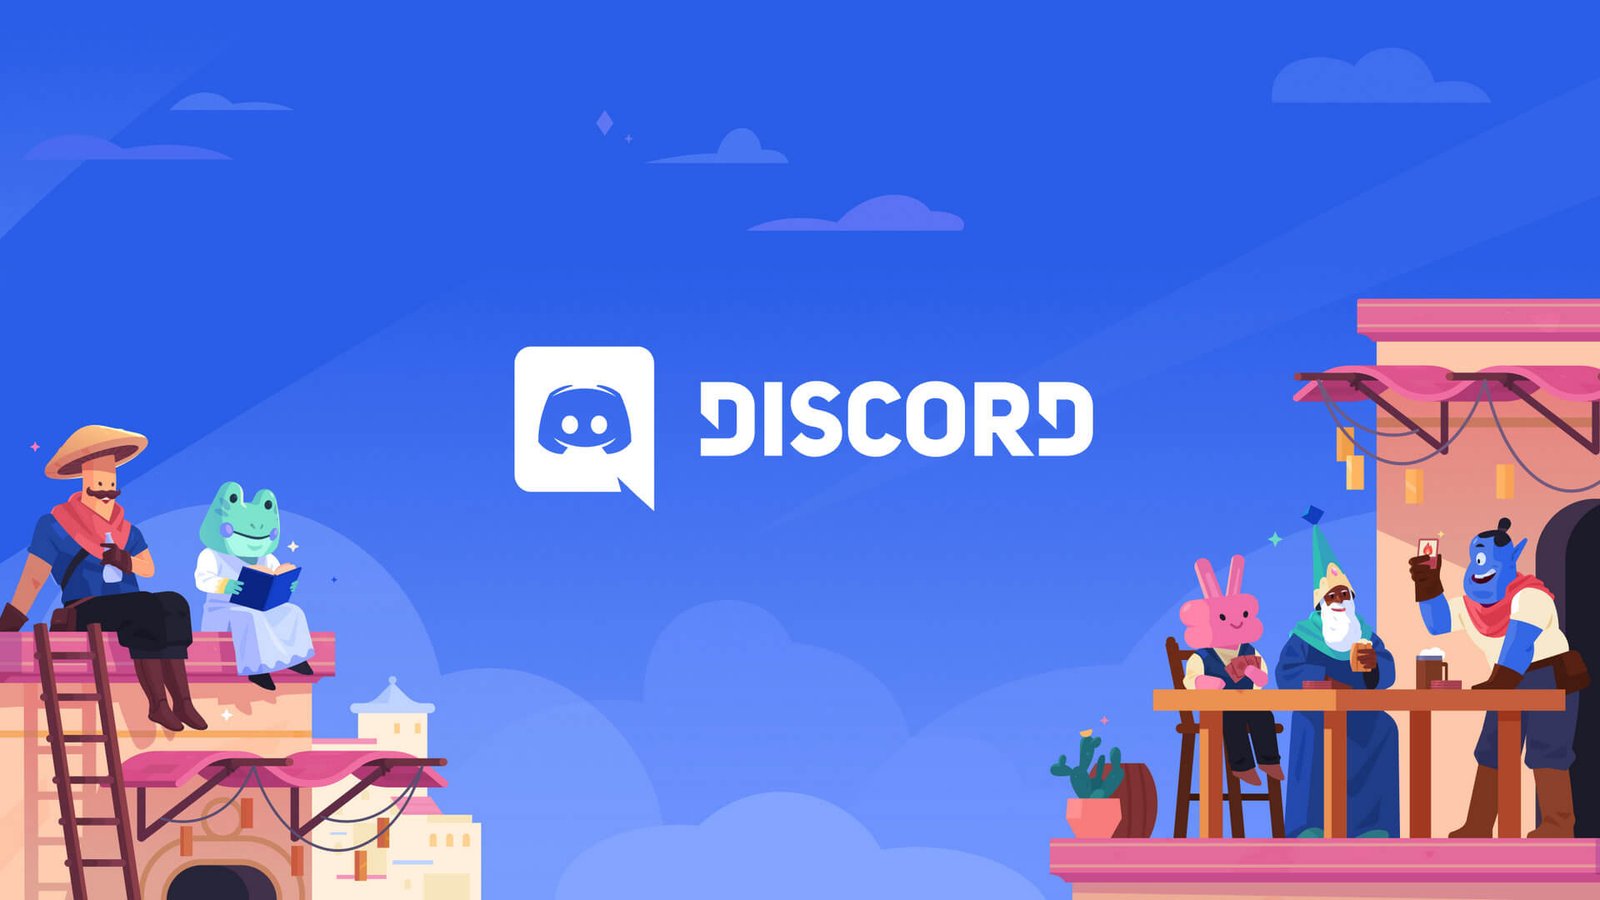 ✦ Discord aged 2019 account 